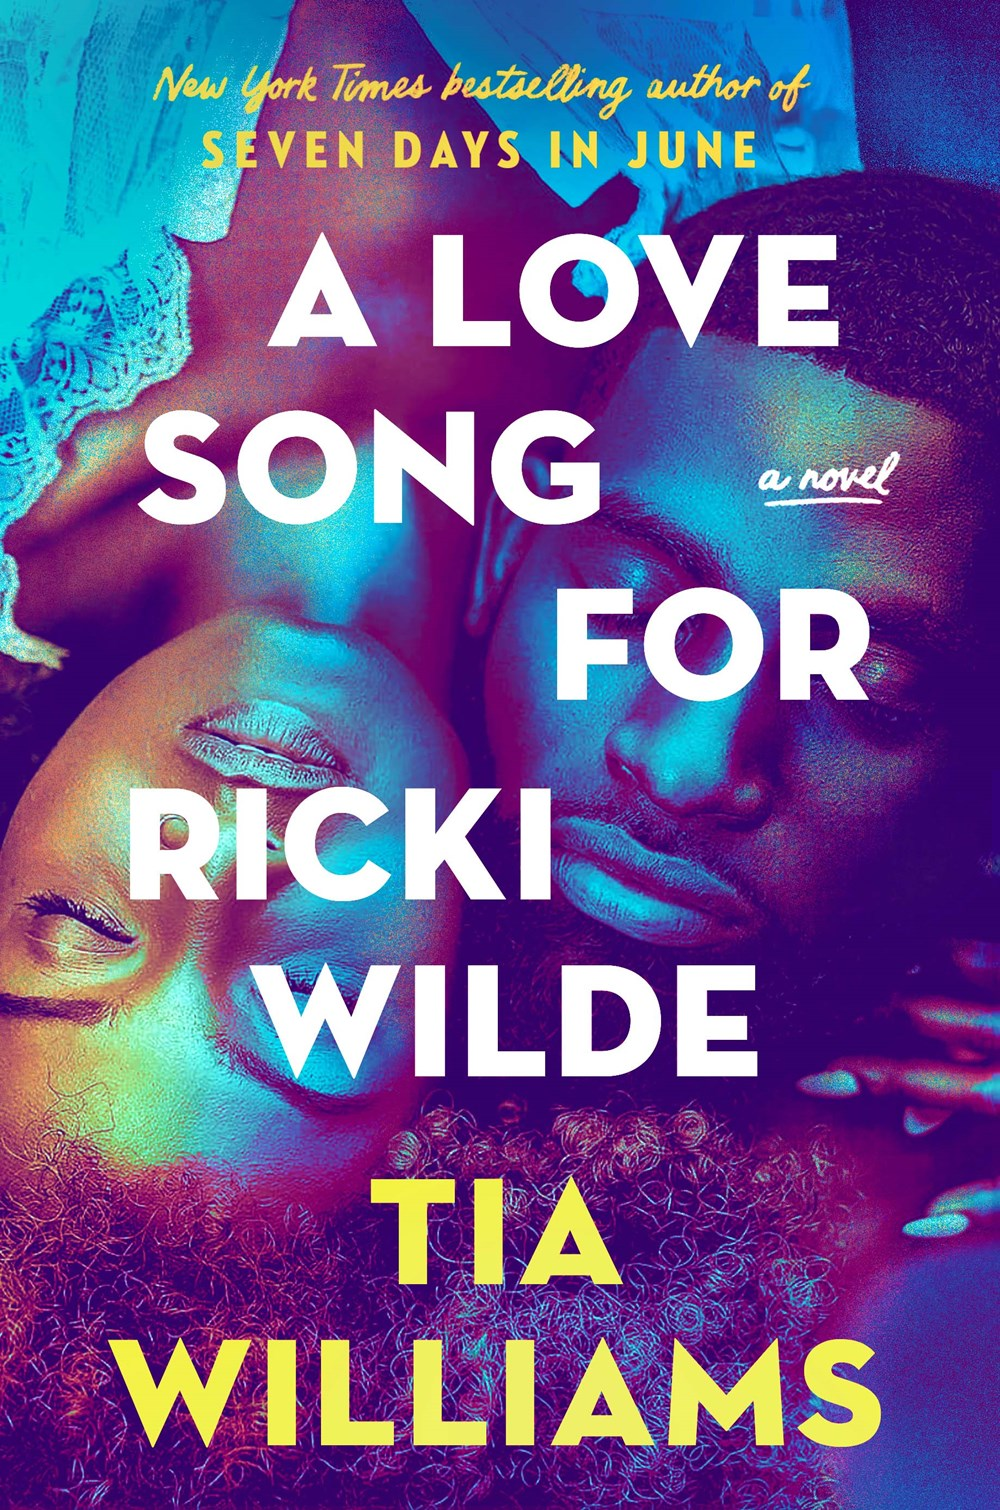 A Love Song for Ricki Wilde
by Tia Williams cover